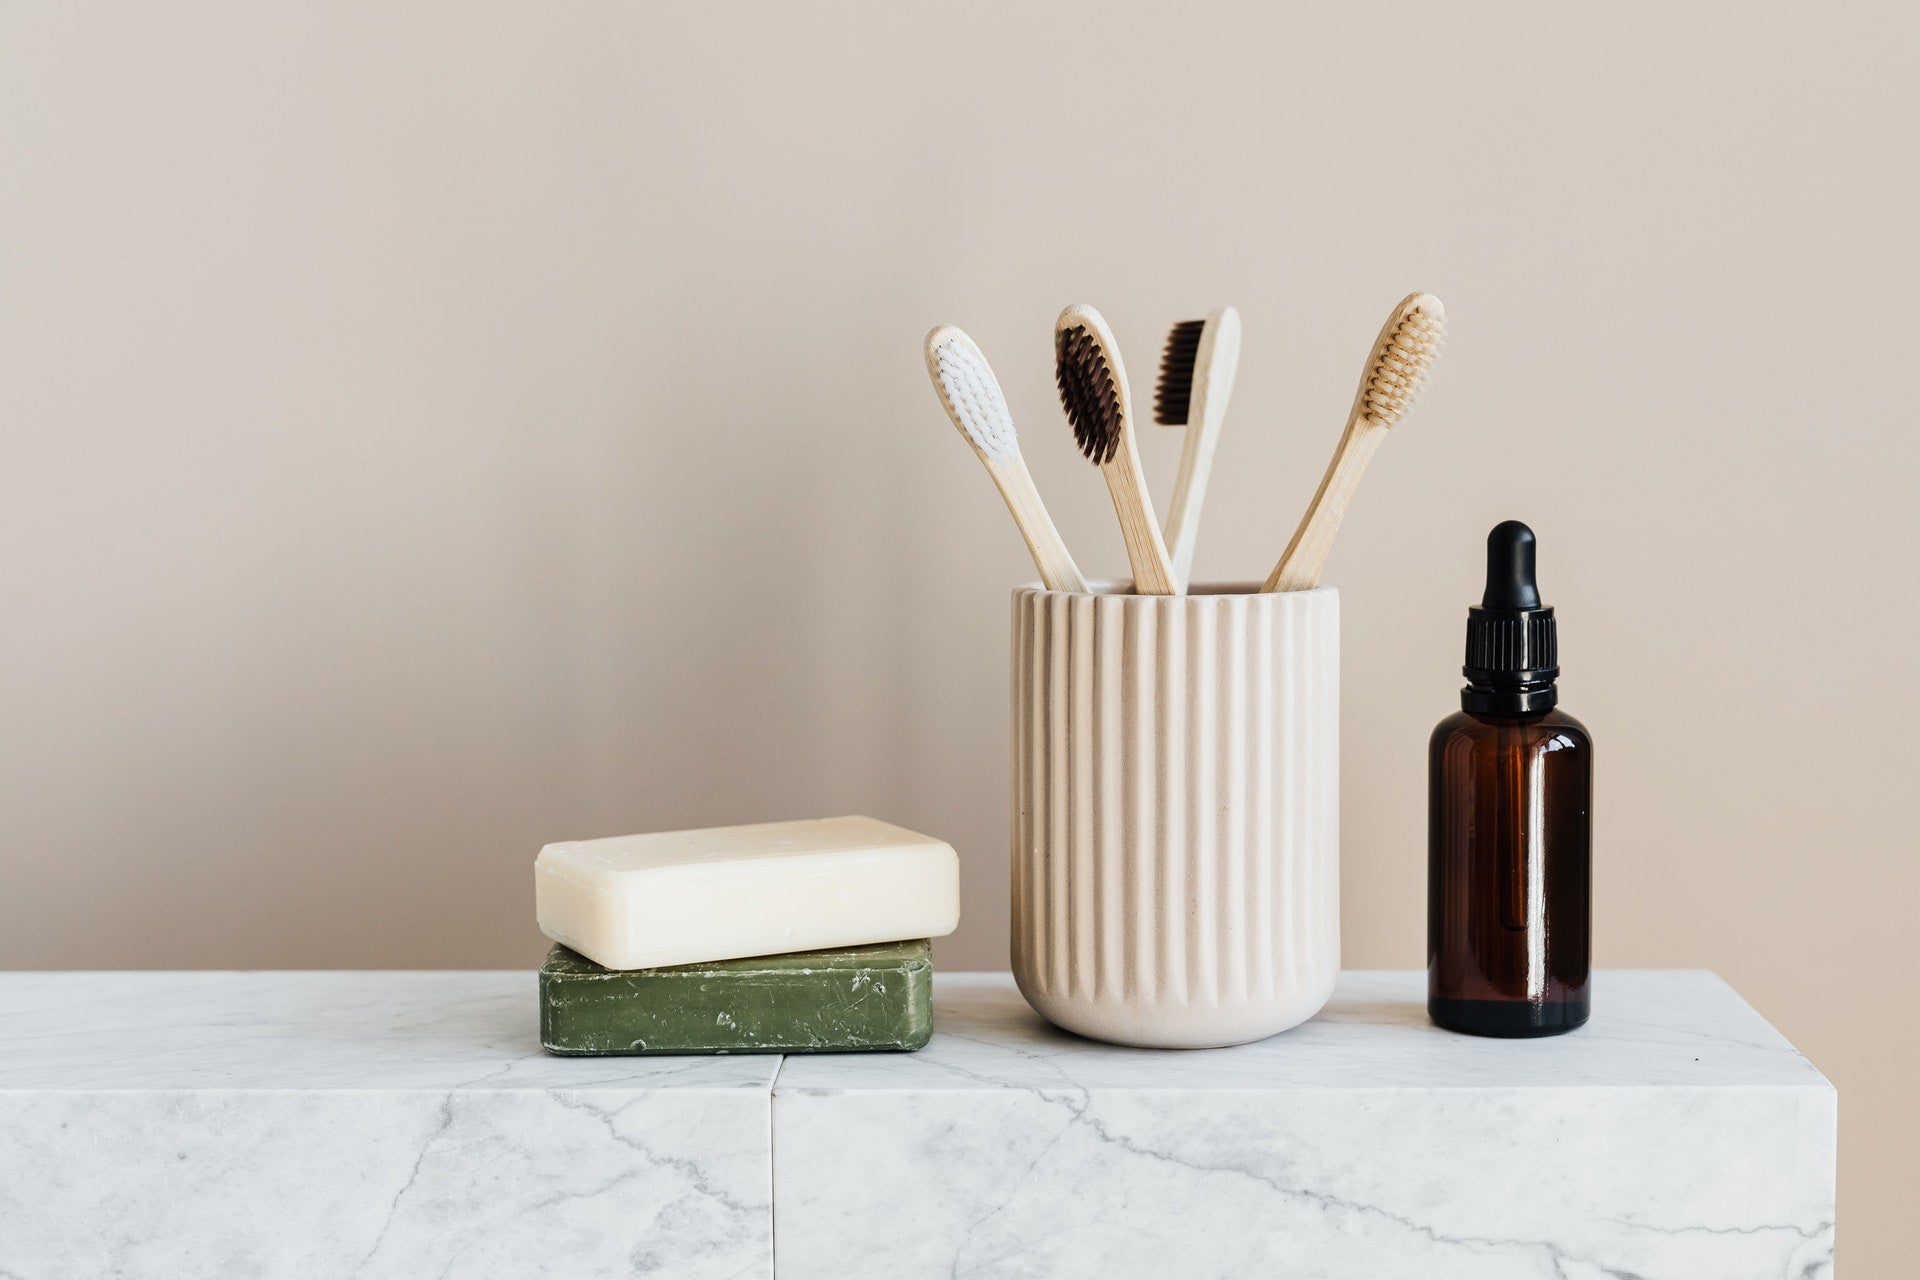 Achieve Sustainable Beauty in 2021 with 5 Simple Eco-Friendly Swaps